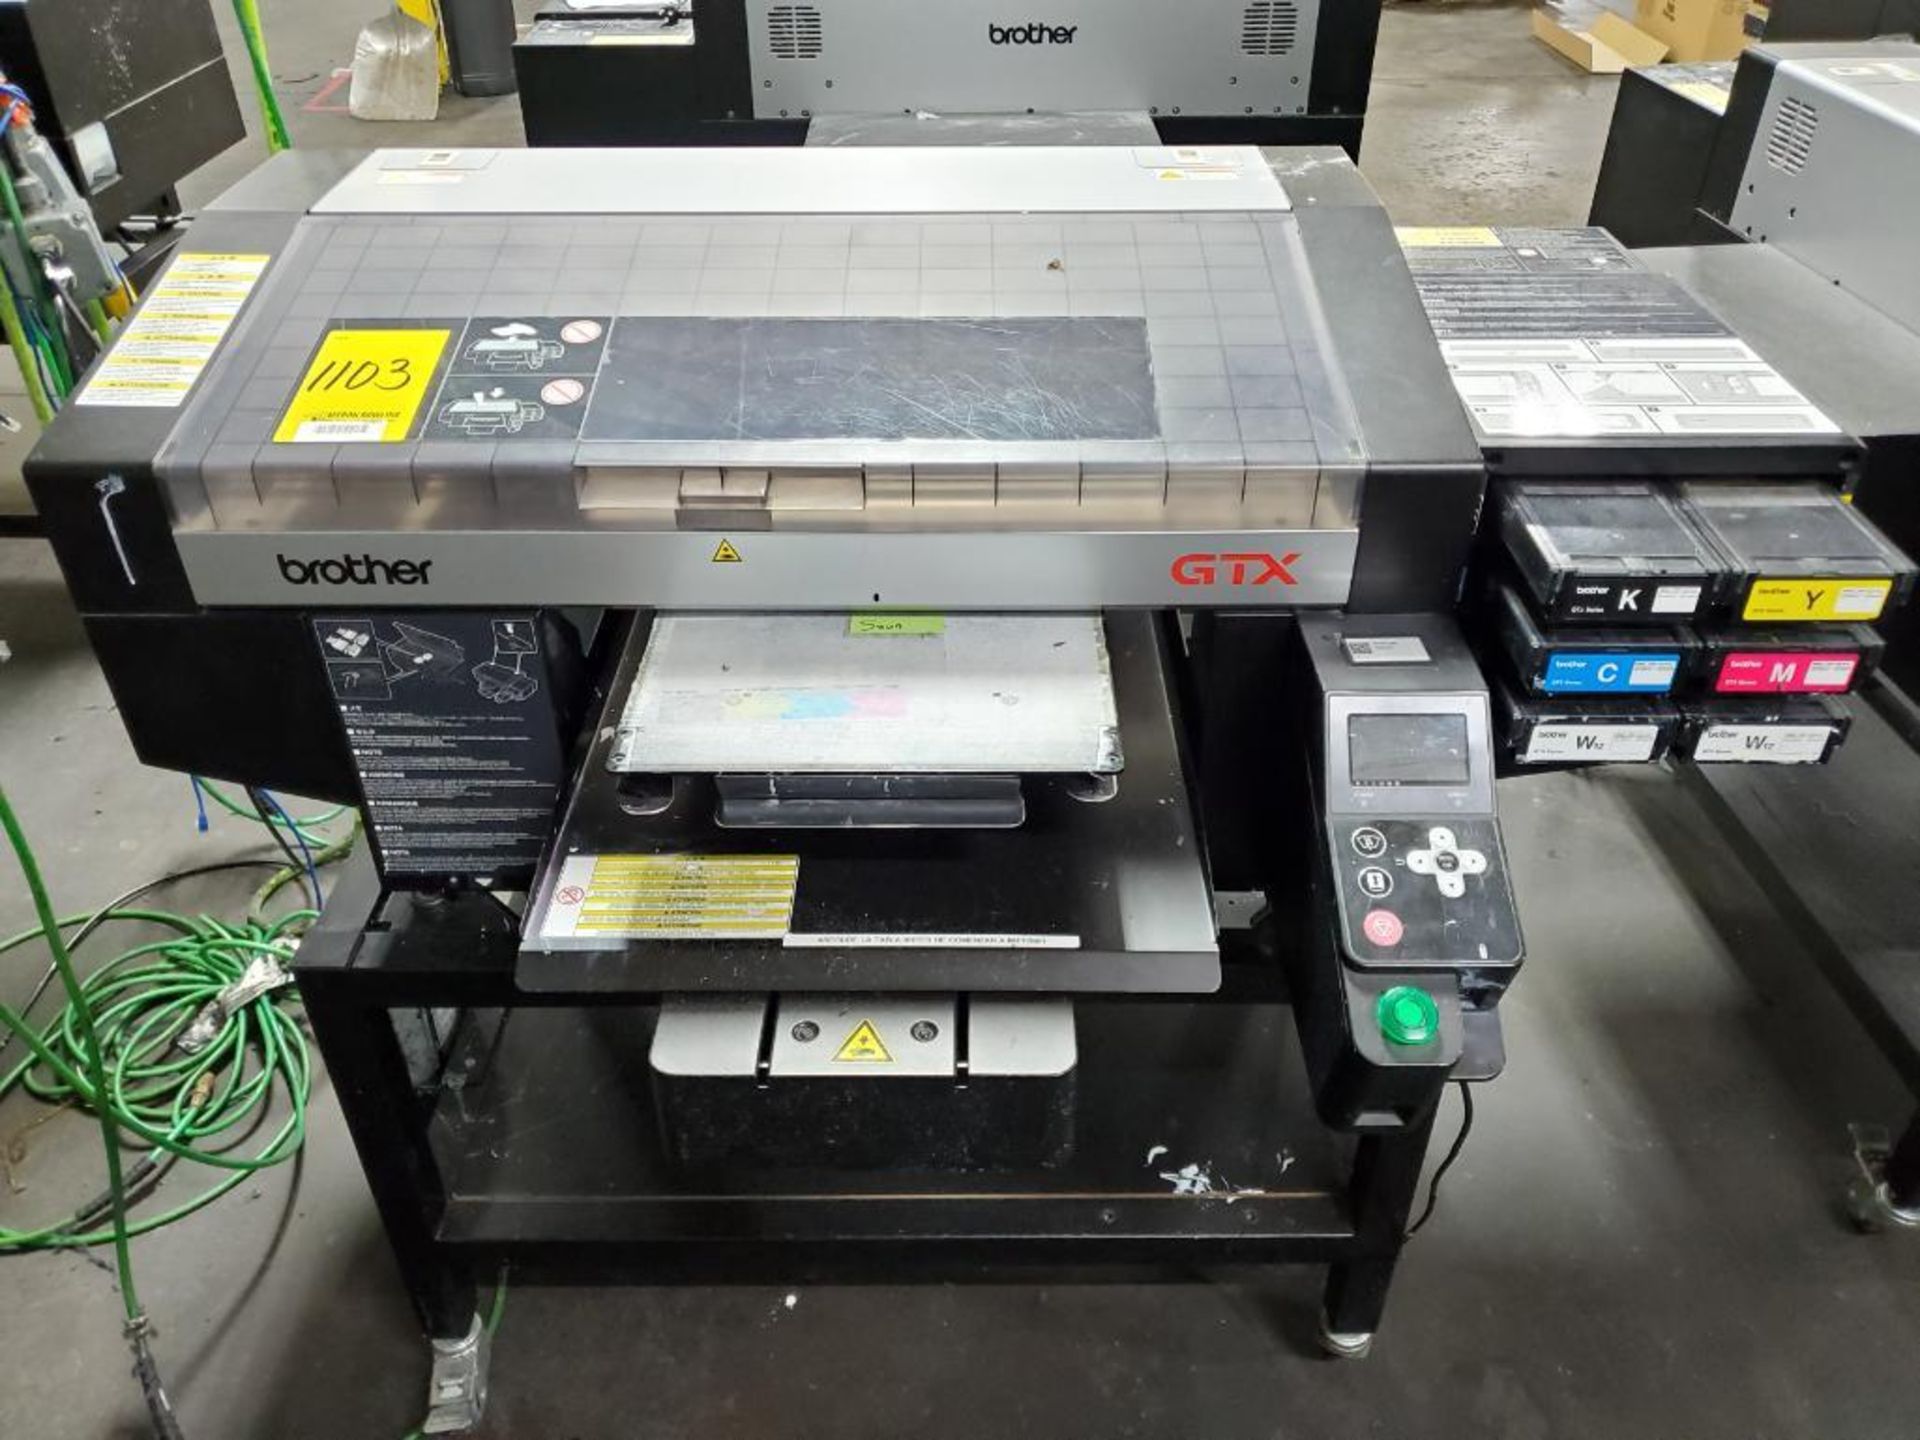 BROTHER GTX-422 GARMENT PRINTER, S/N G9931652, 14-1/2'' X 16-1/2'' TABLE, (NO SCANNER), 63,427 TOTAL